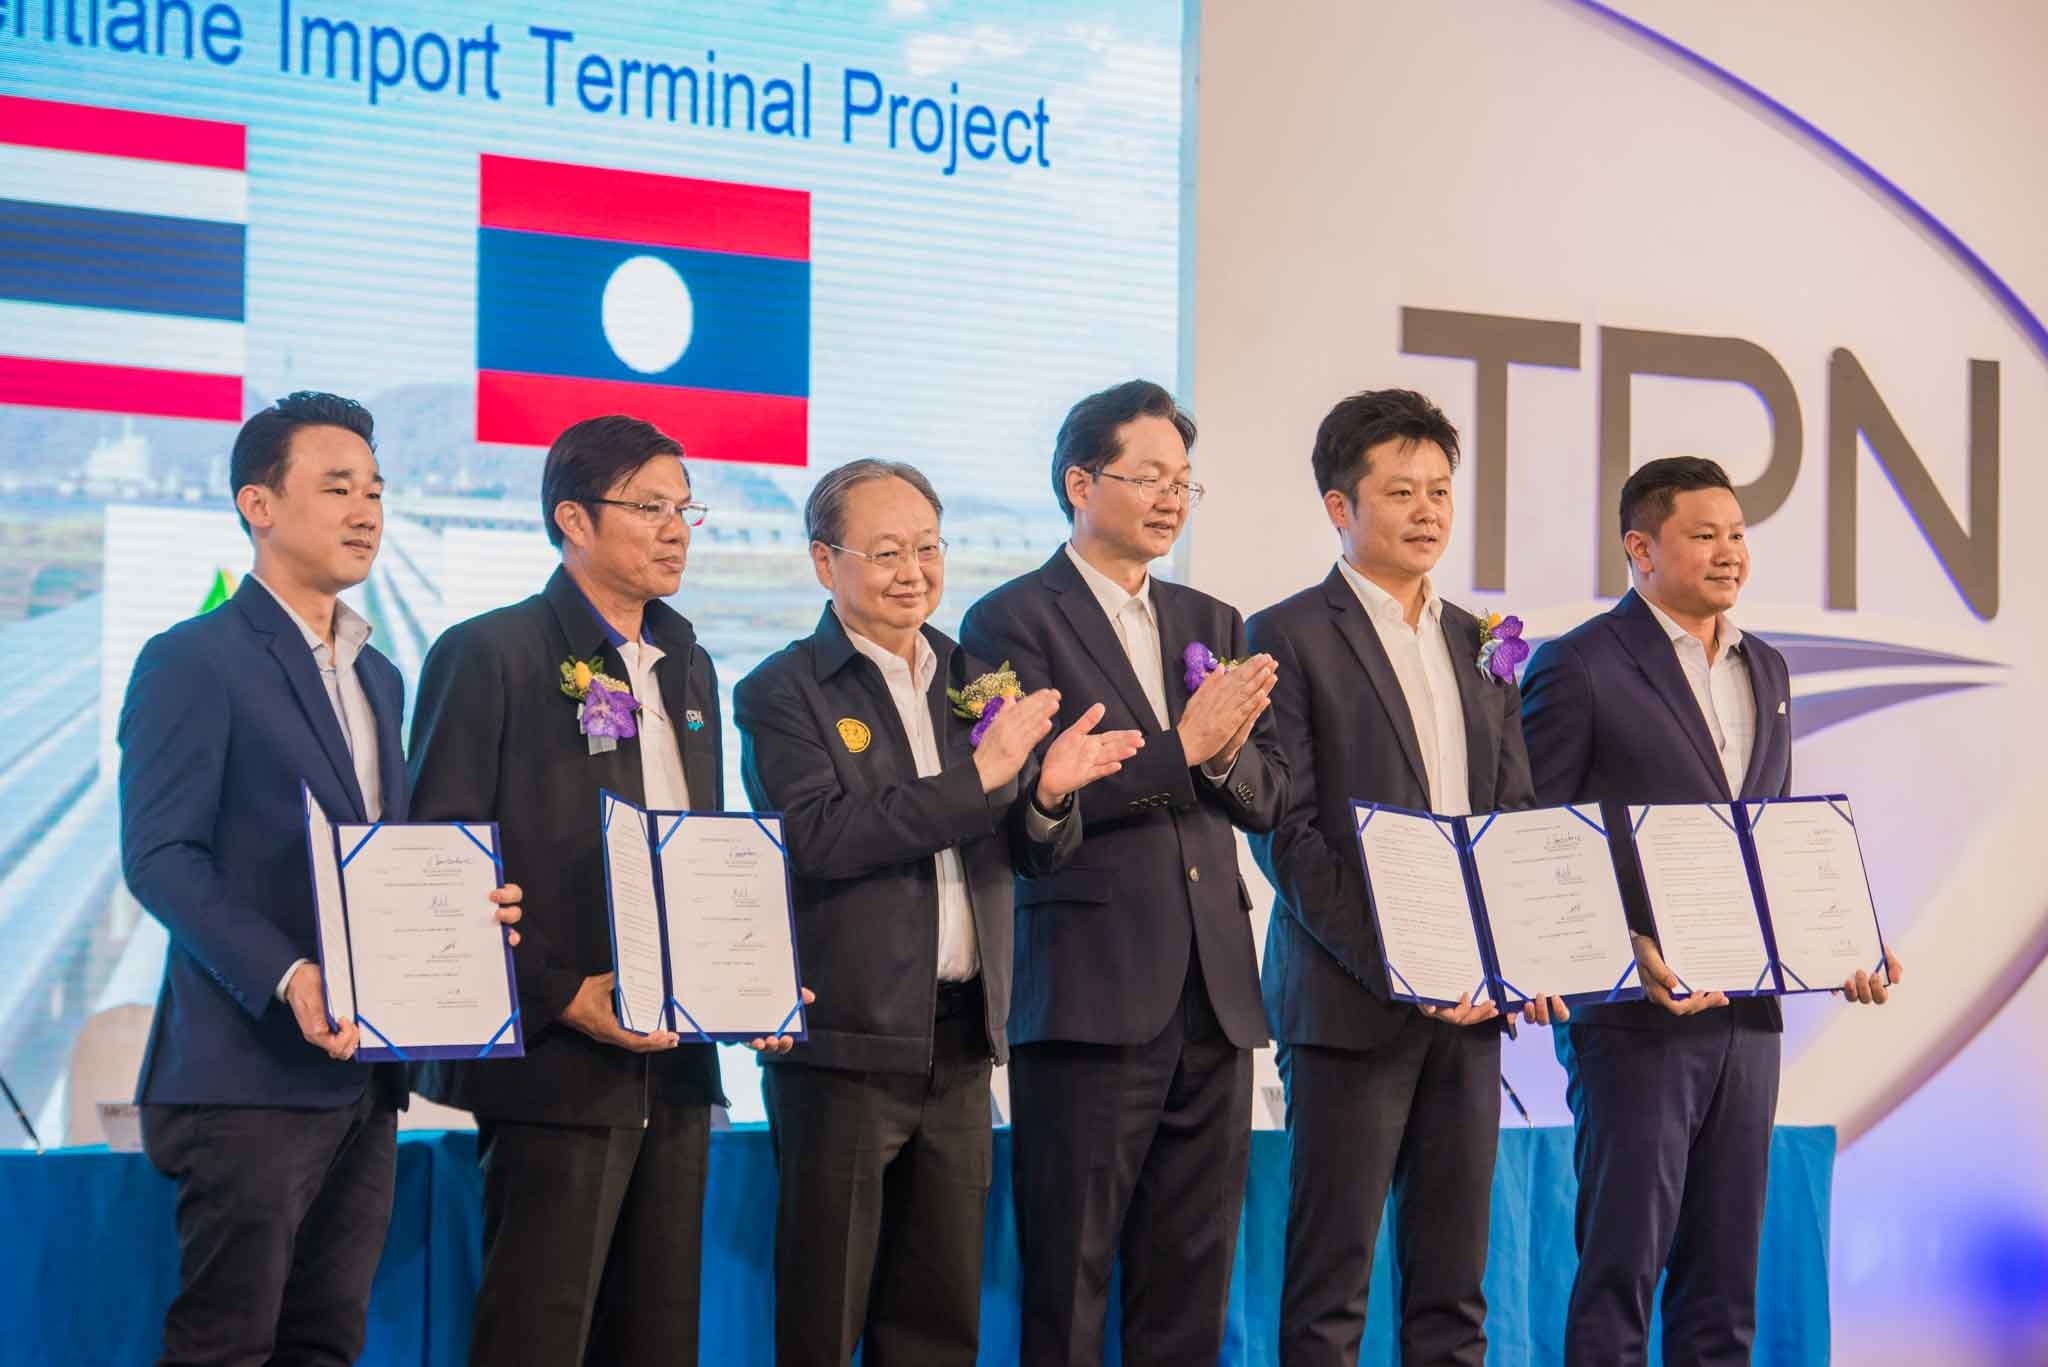 TPN CPP ENECO DYNAMIC and SITTHI LOGISTICS LAO signed the MOU